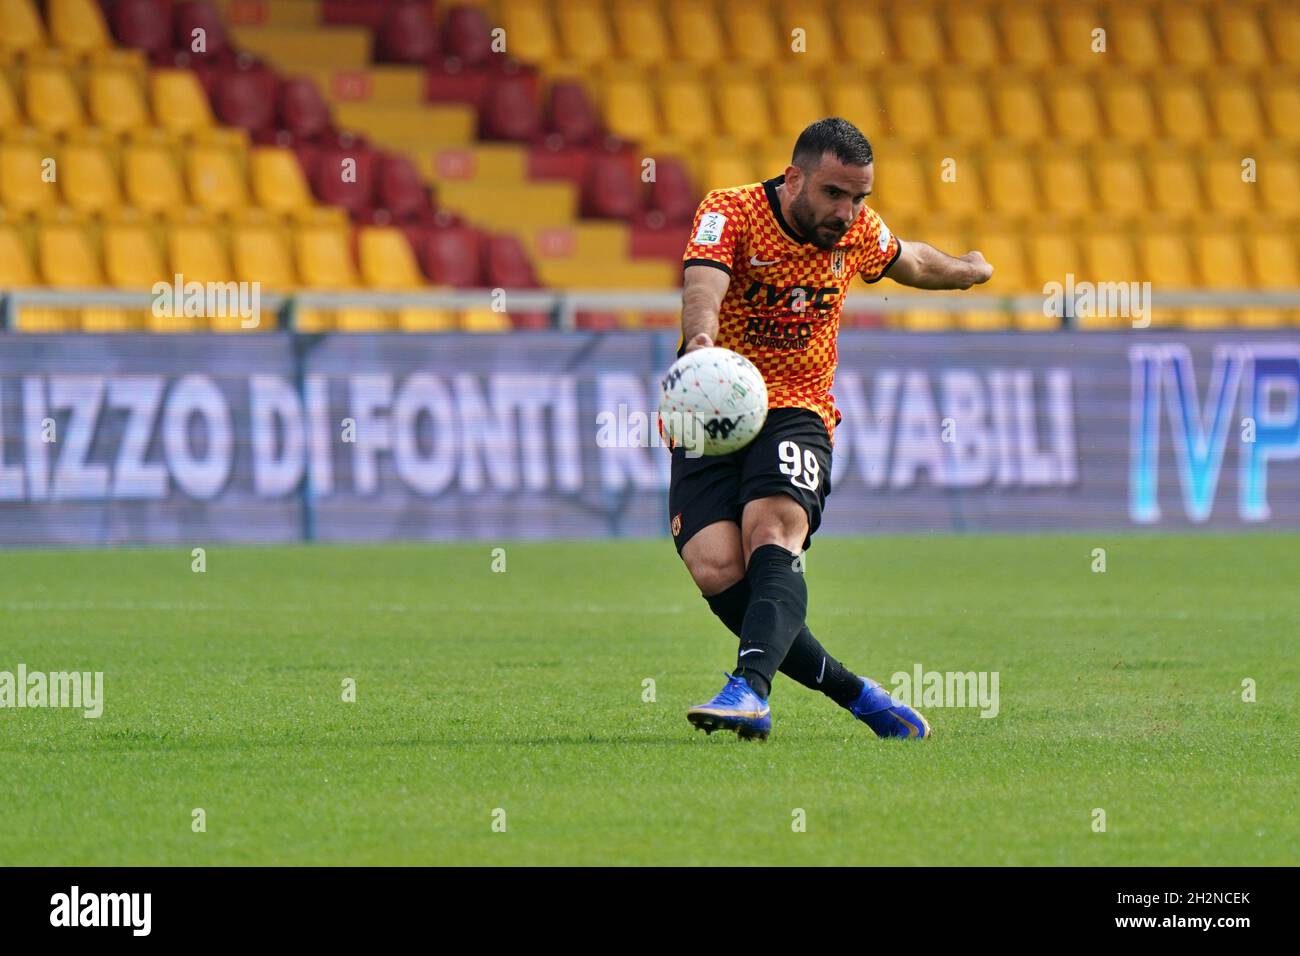 Benevento, Italy. 23rd Oct, 2021. Enrico Brignola (Benevento Calcio) during Benevento  Calcio vs Cosenza Calcio, Italian Football Championship League BKT in  Benevento, Italy, October 23 2021 Credit: Independent Photo Agency/Alamy  Live News